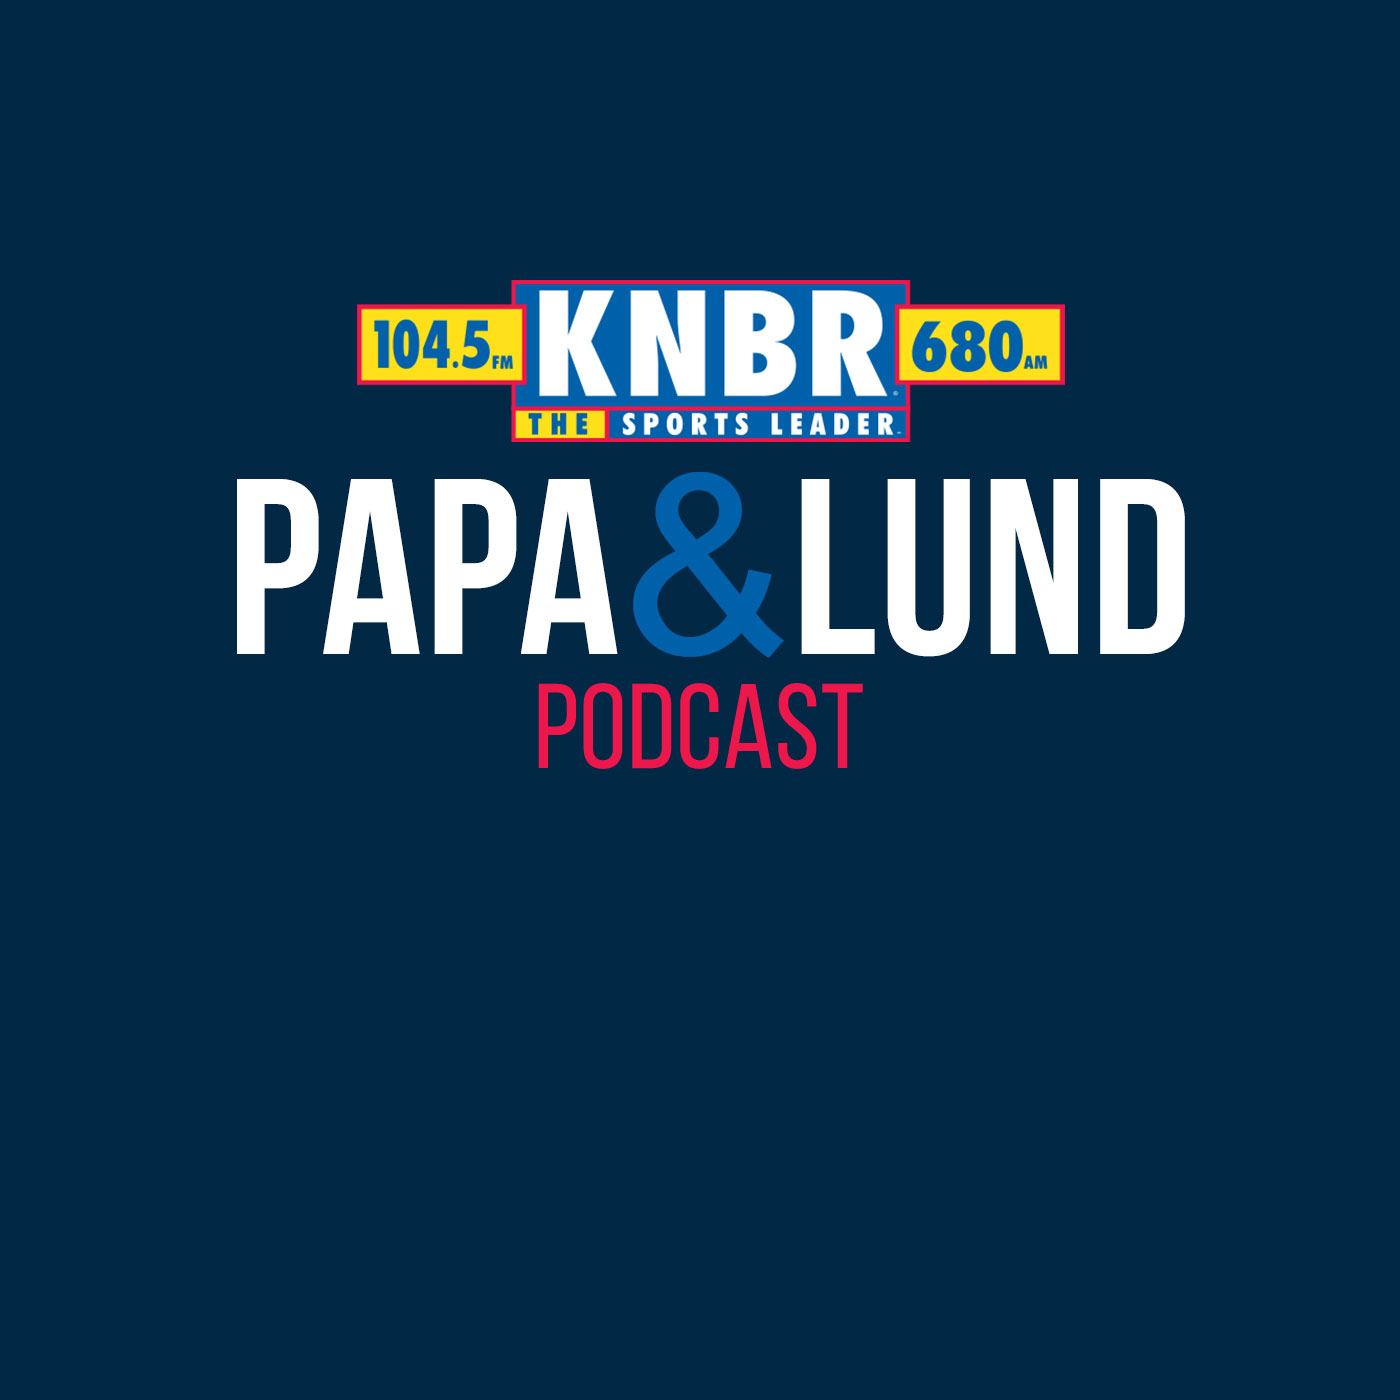 1-19 Guss Armstead joins Papa and Lund to talk about Arik Armstead's success on and off the field